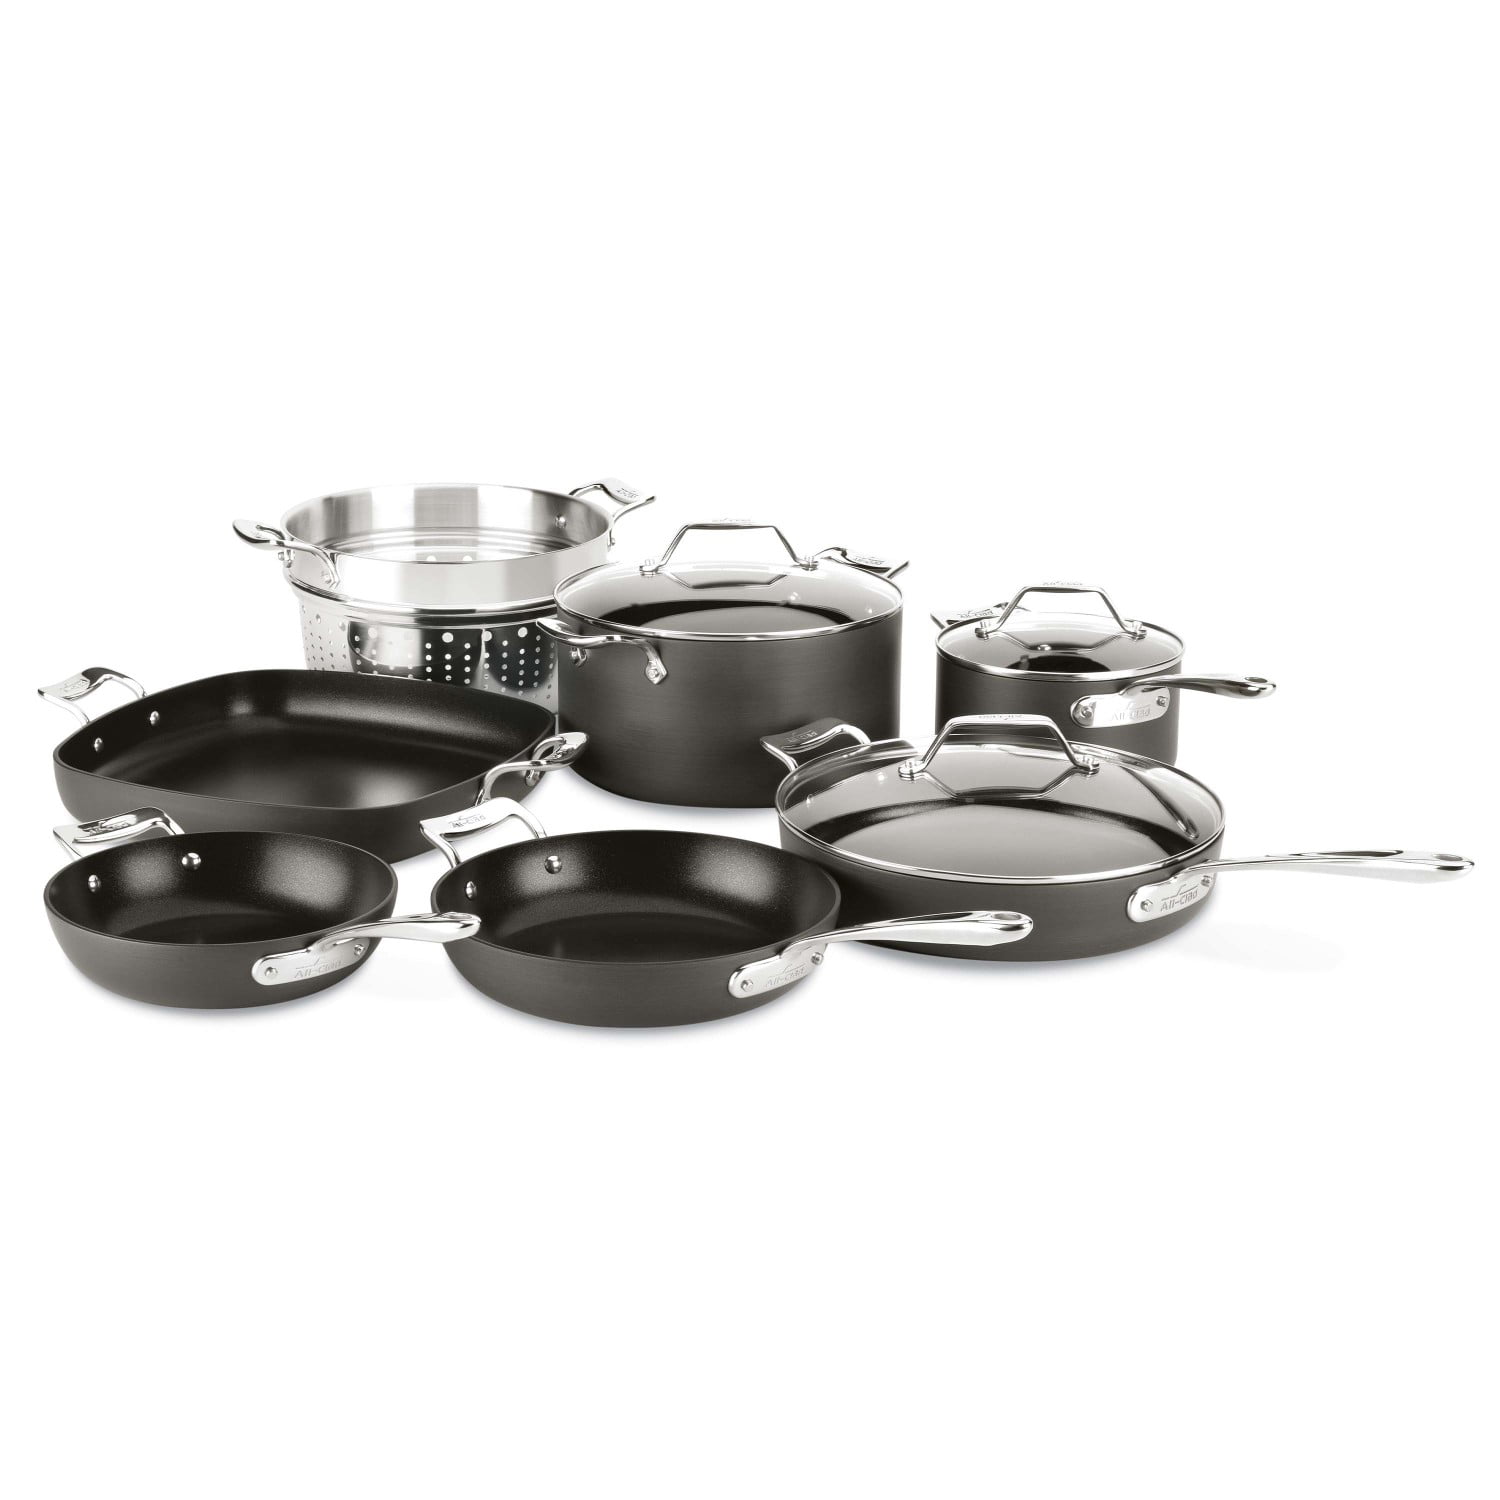 All-Clad Essentials Hard Anodized Nonstick Cookware Set, 10 piece - image 1 of 11